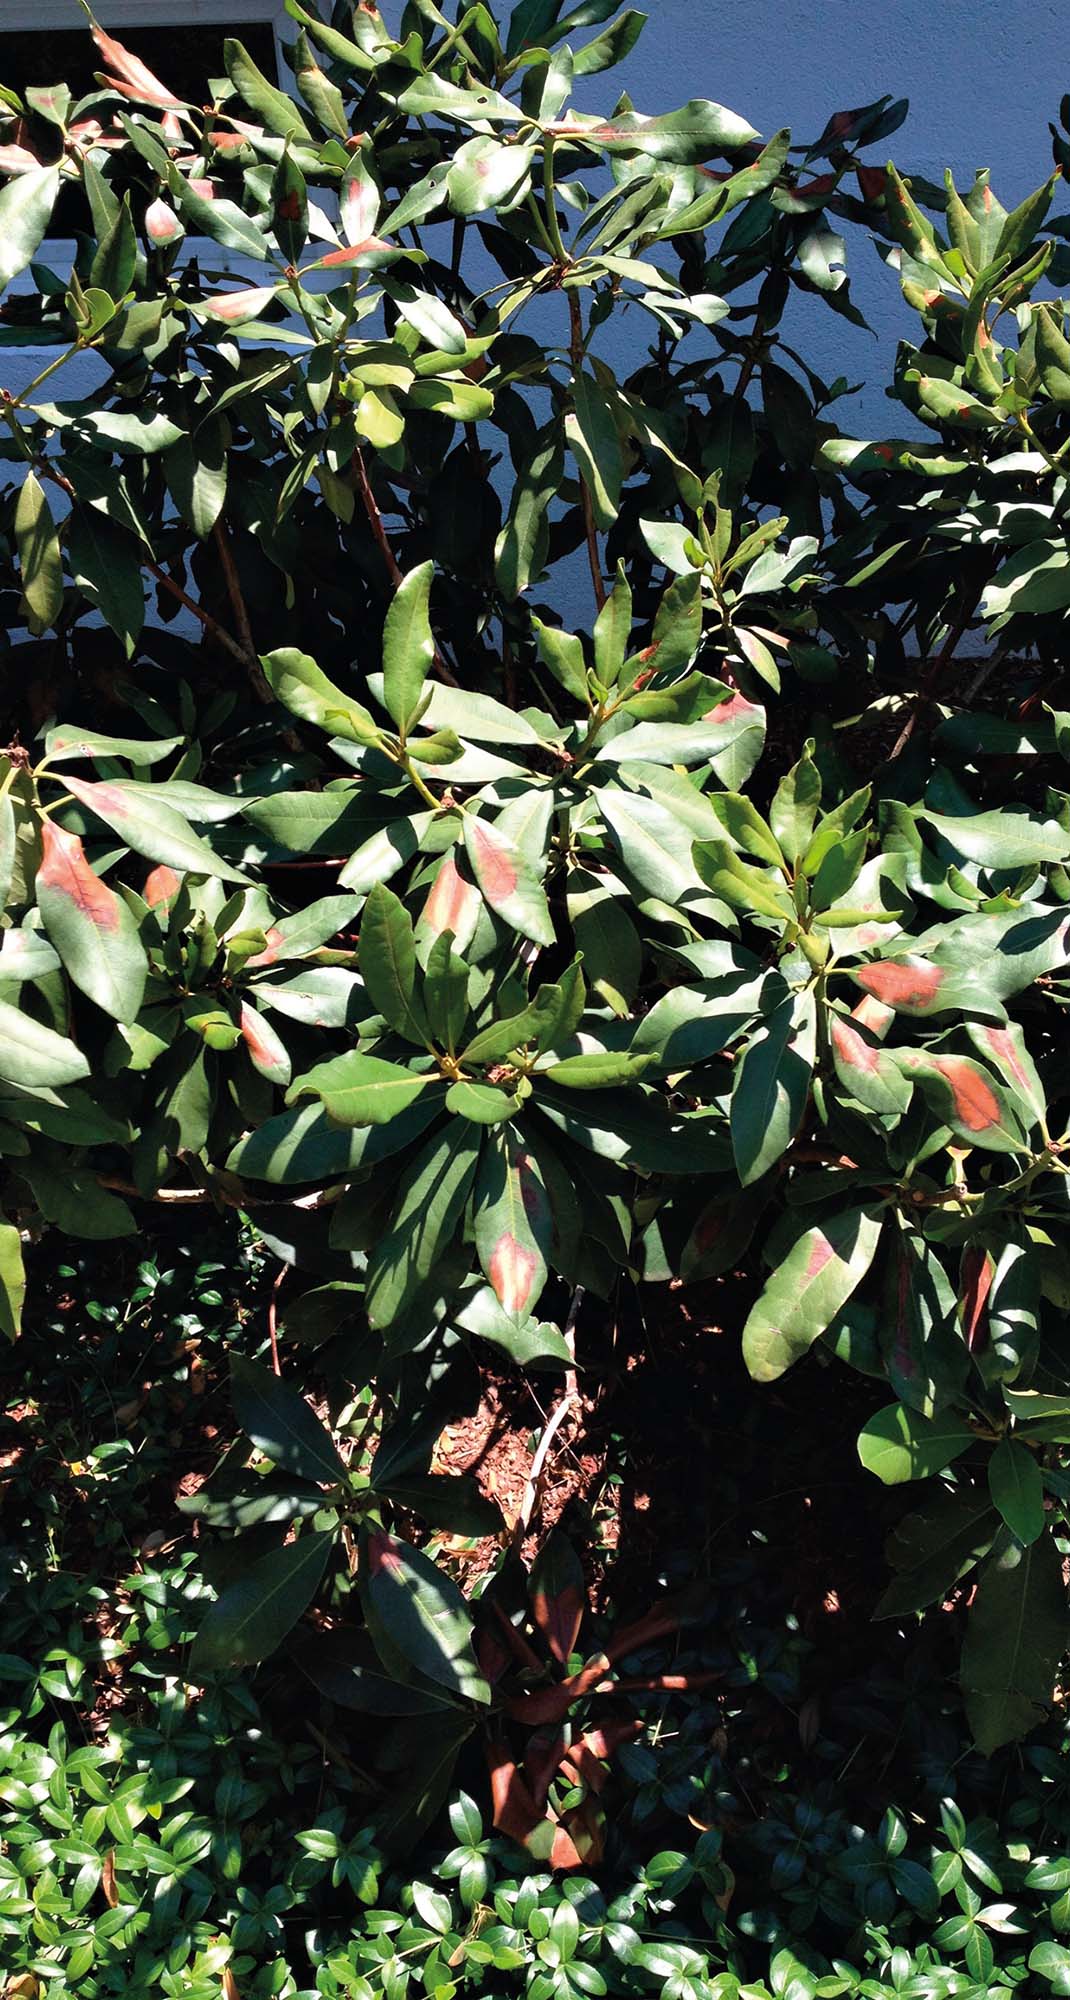 2. Symptoms of prolonged heat stress on rhododendron.